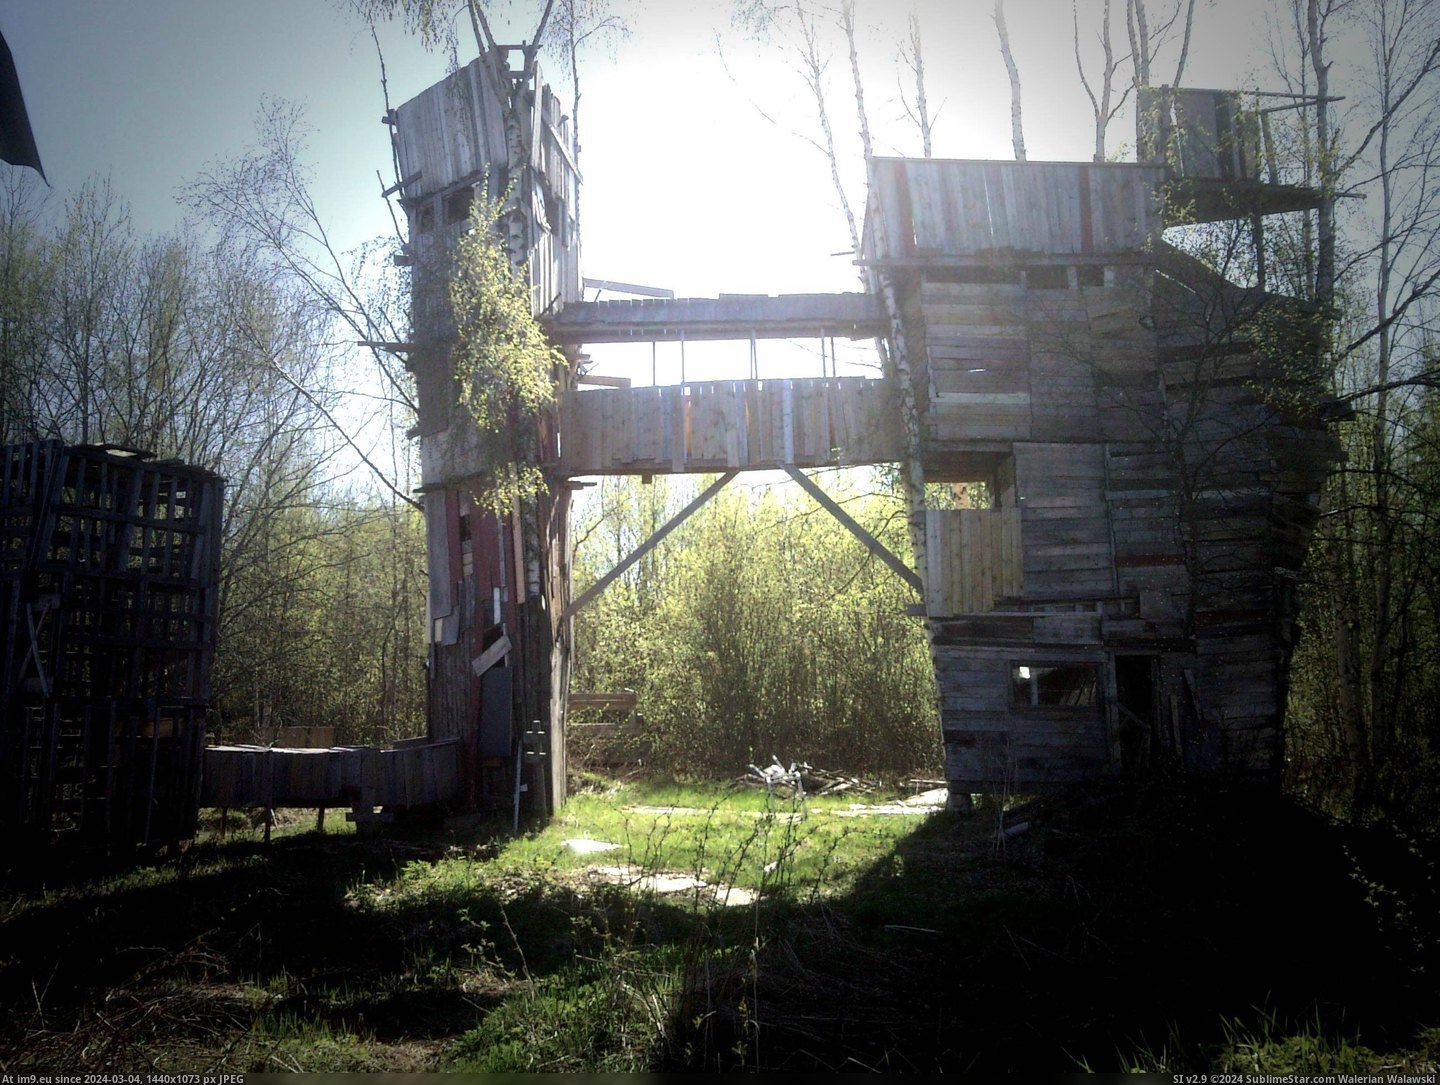 #Work #Hard #Built #Neighbours #Treehouse #Complai #Brothers #Summers #Torn [Pics] Me and my brothers treehouse we built during 5 summers of hard work, it had to be torn down because of neighbours complai Pic. (Bild von album My r/PICS favs))